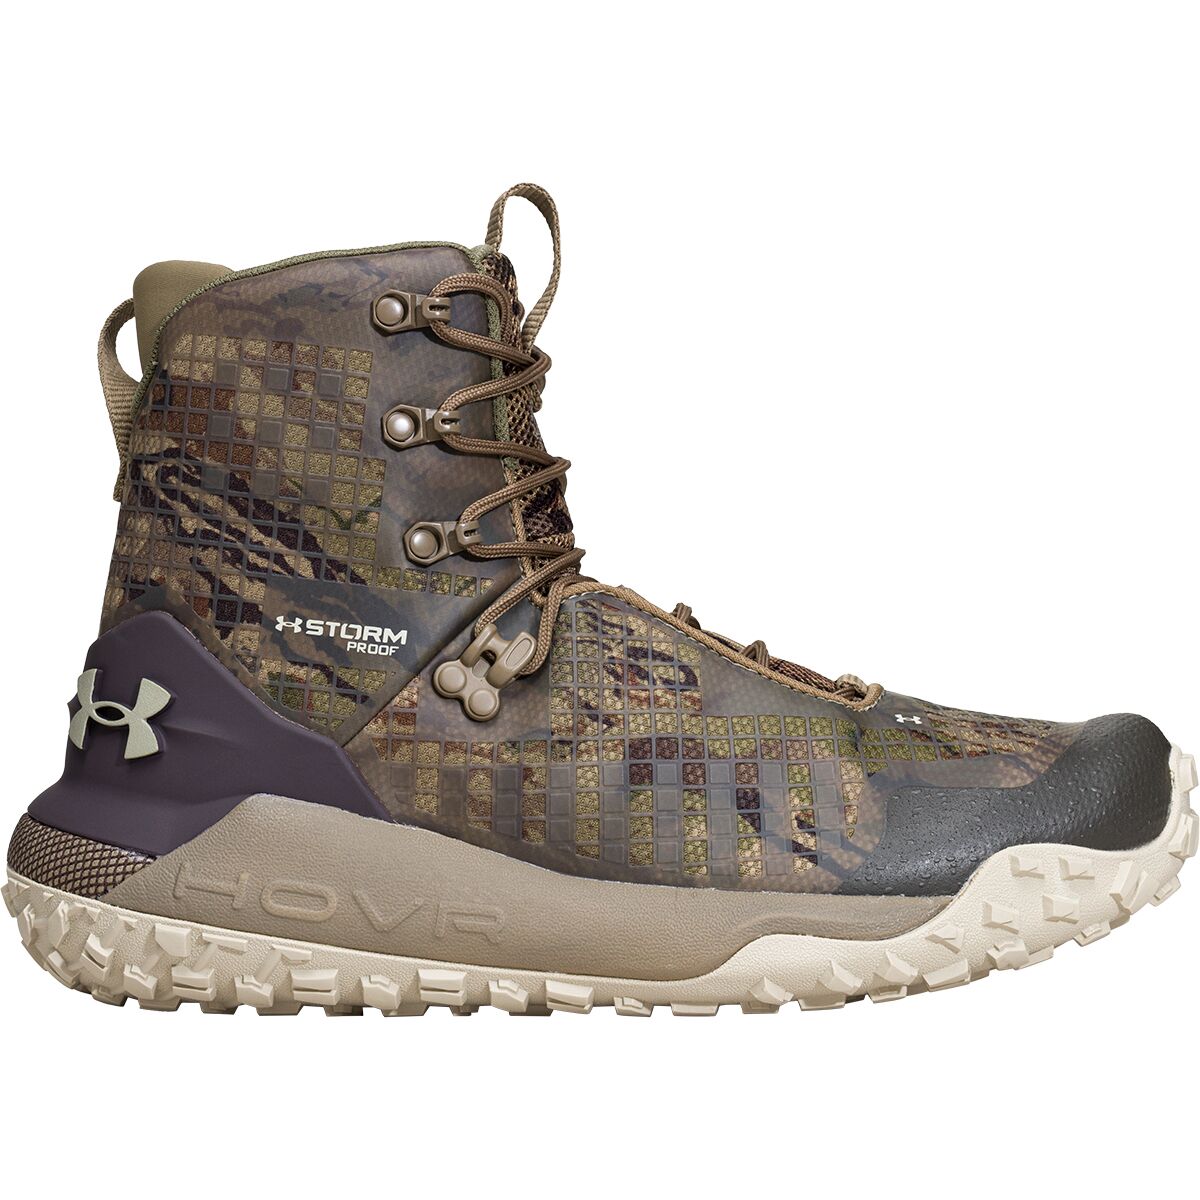 Under Armour Dawn WP 2.0 Hiking Boot - Men's Footwear